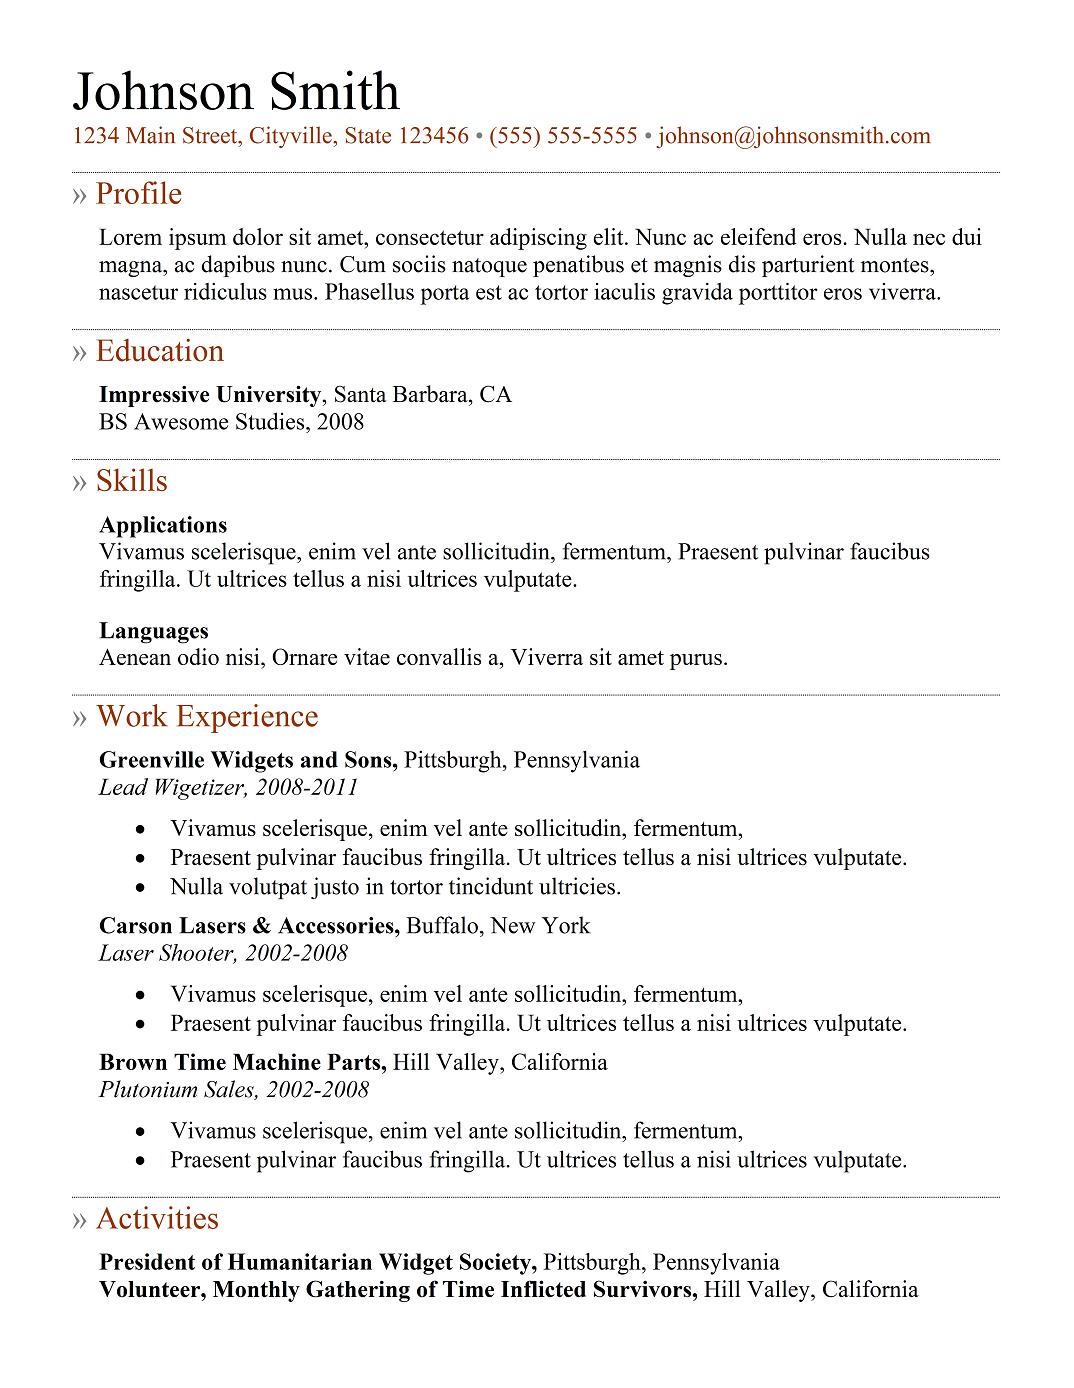 Sample resume for school security officer